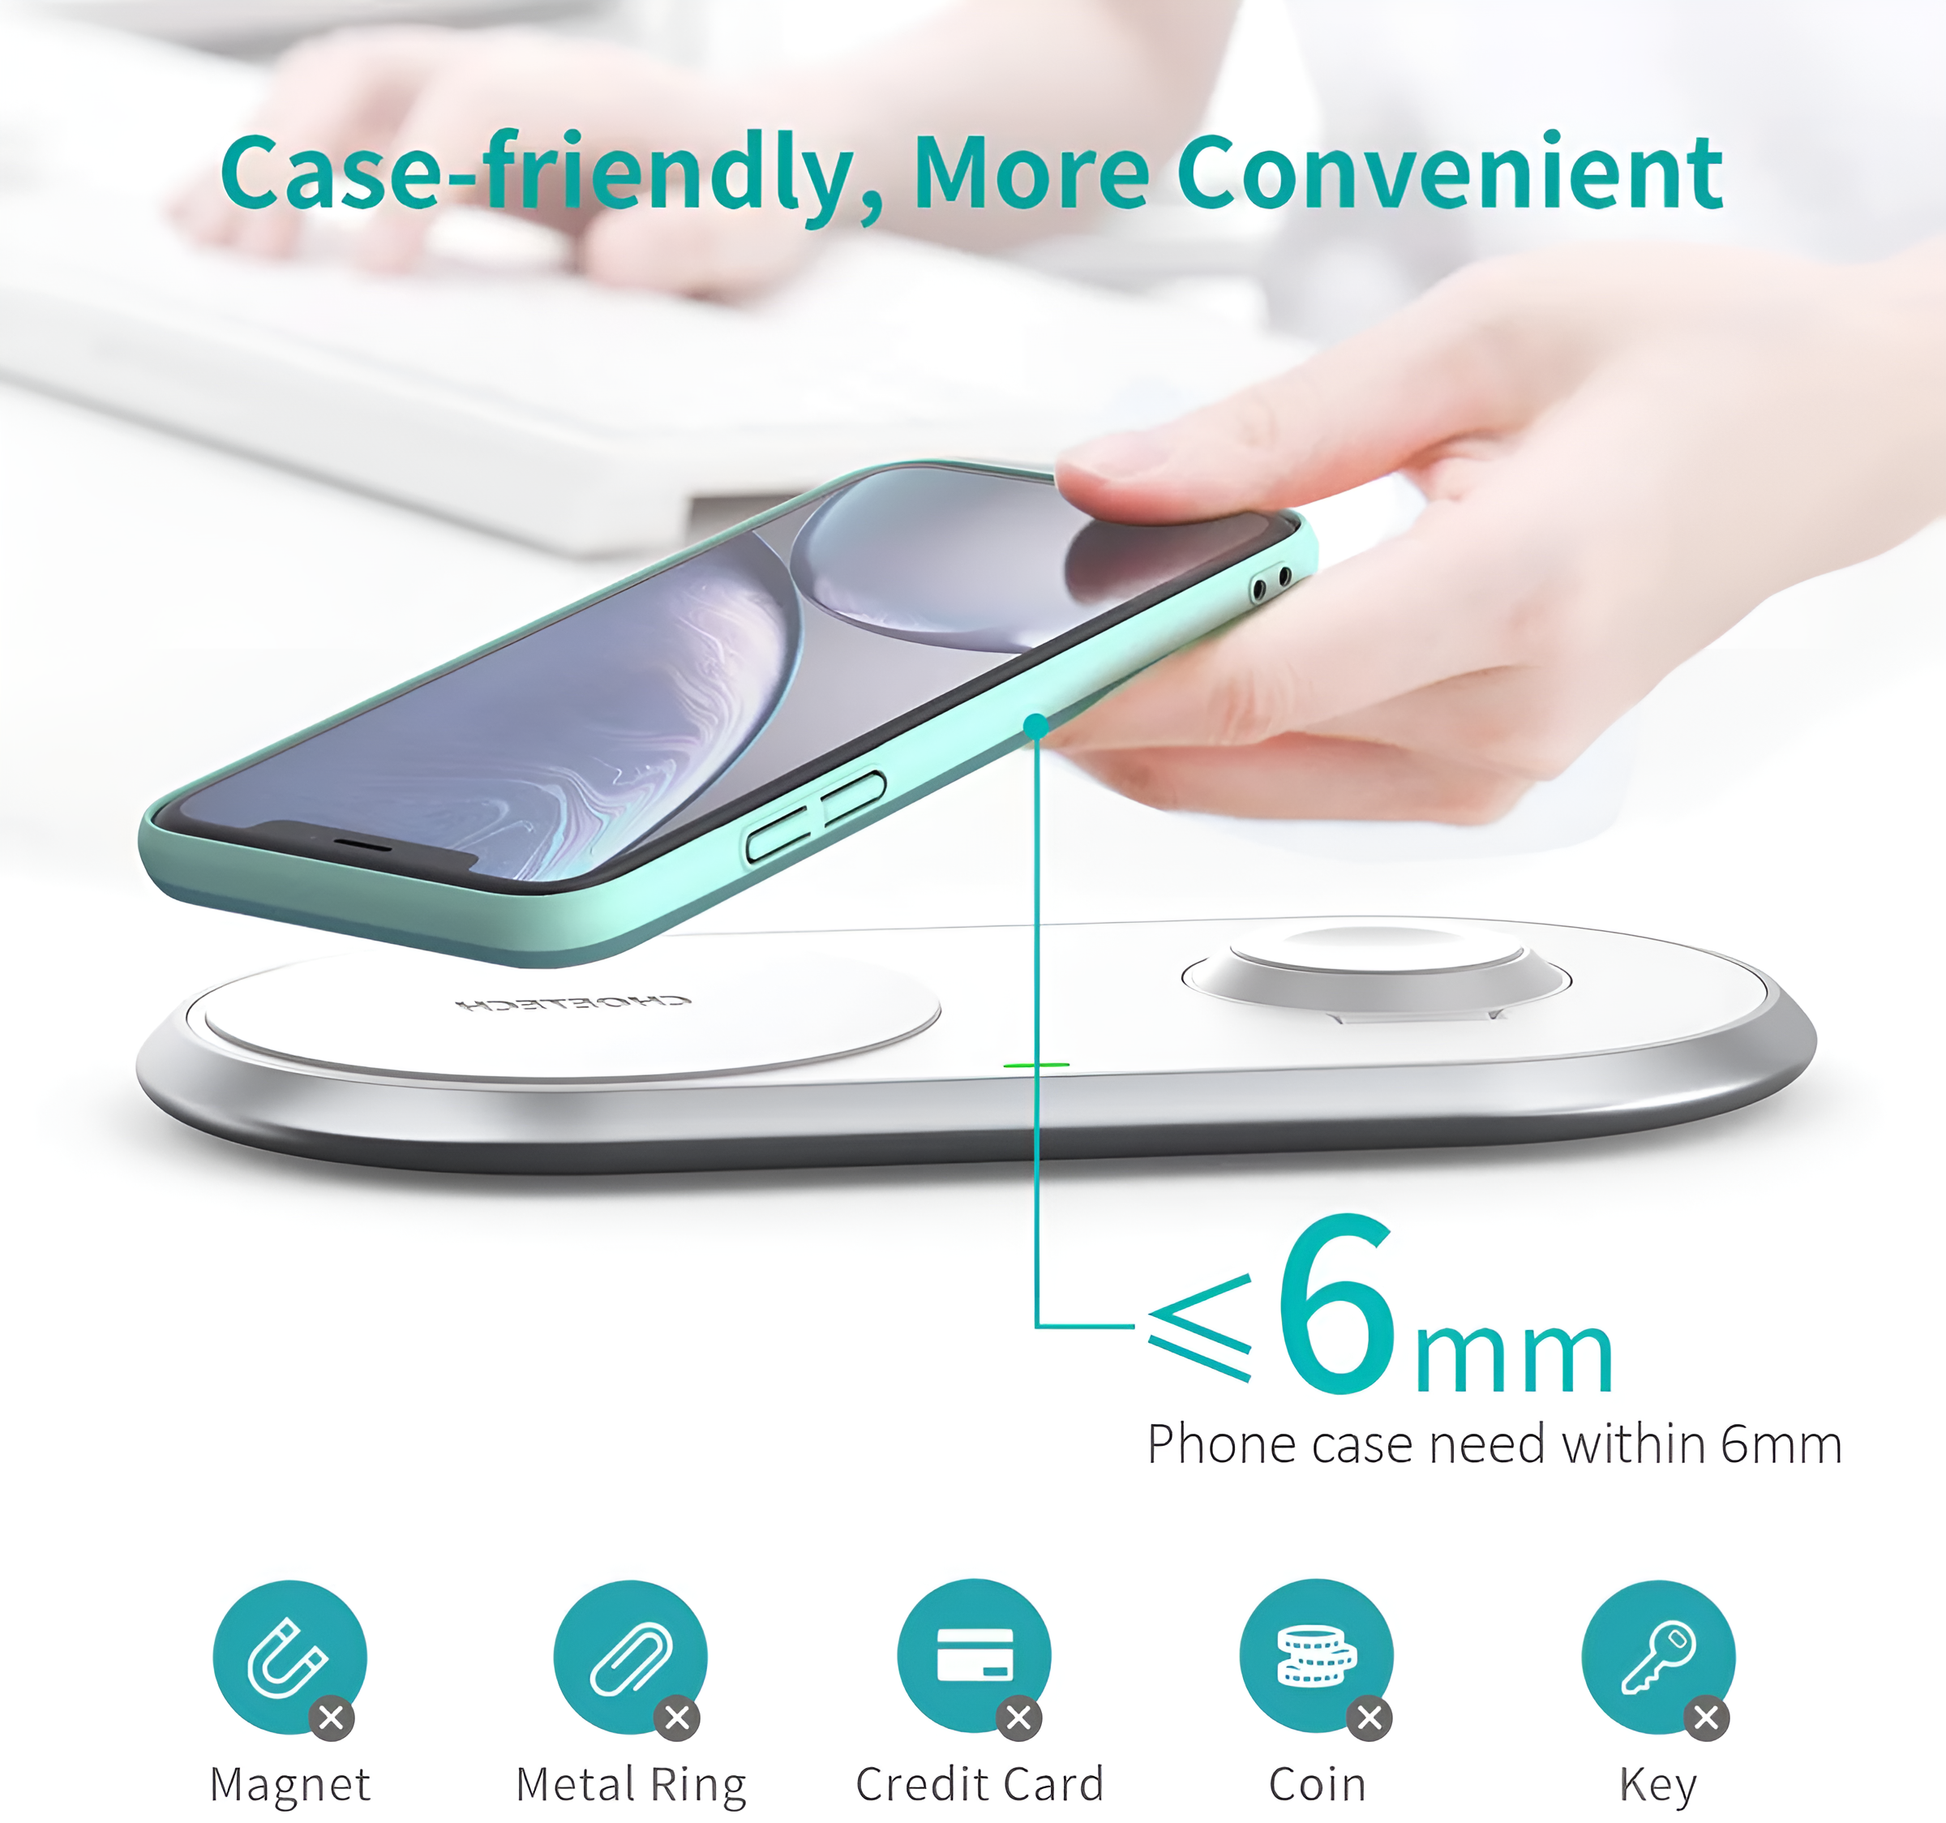 Choetech 2-in-1 15W Dual Wireless Charger For Iphone and Apple Watch (MFI Certified), T317 by jcbl accessories. Case-friendly, More Convenient ,6mm, phone case need within 6mm, No magnet, No metal Ring| No credit card| No coin| No key| 